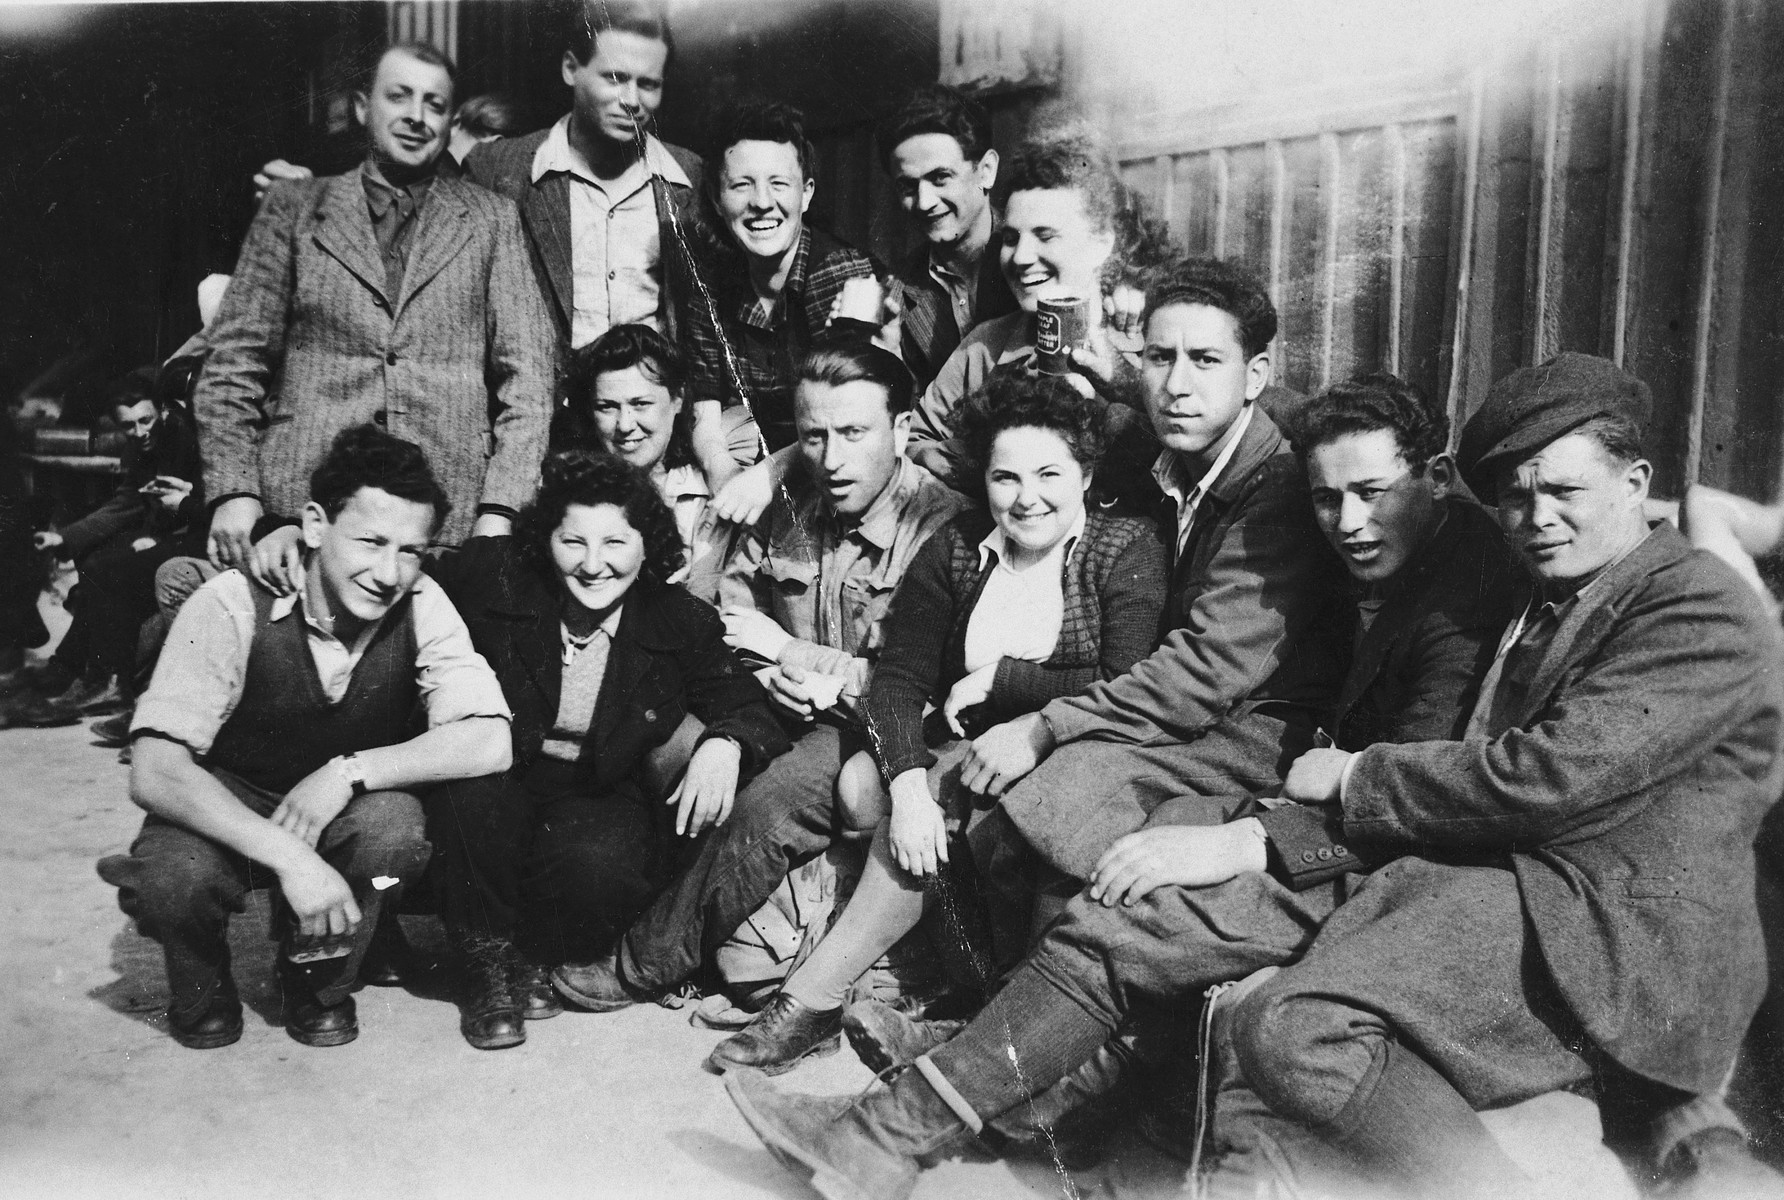 Group portrait of young Jewish DPs who are seeking to immigrate to Palestine illegally, at a way station near the Italian border.

They await permission to cross the border and transport into Italy.  Seated in the front row from left to right are: Moniek Szeps, Goldi Silberstein, Levi Danielski, unknown, Meni Szmulewicz, Mendel Ingber and Yehezkel (Nandor) Tesler.  In the second row, from left to right are: Zlotnik, Arik Ofner, Hana, Mojszale Wyszogrodzki, Haja Danielski; seated above Goldi Silberstein is Hana Ingber.